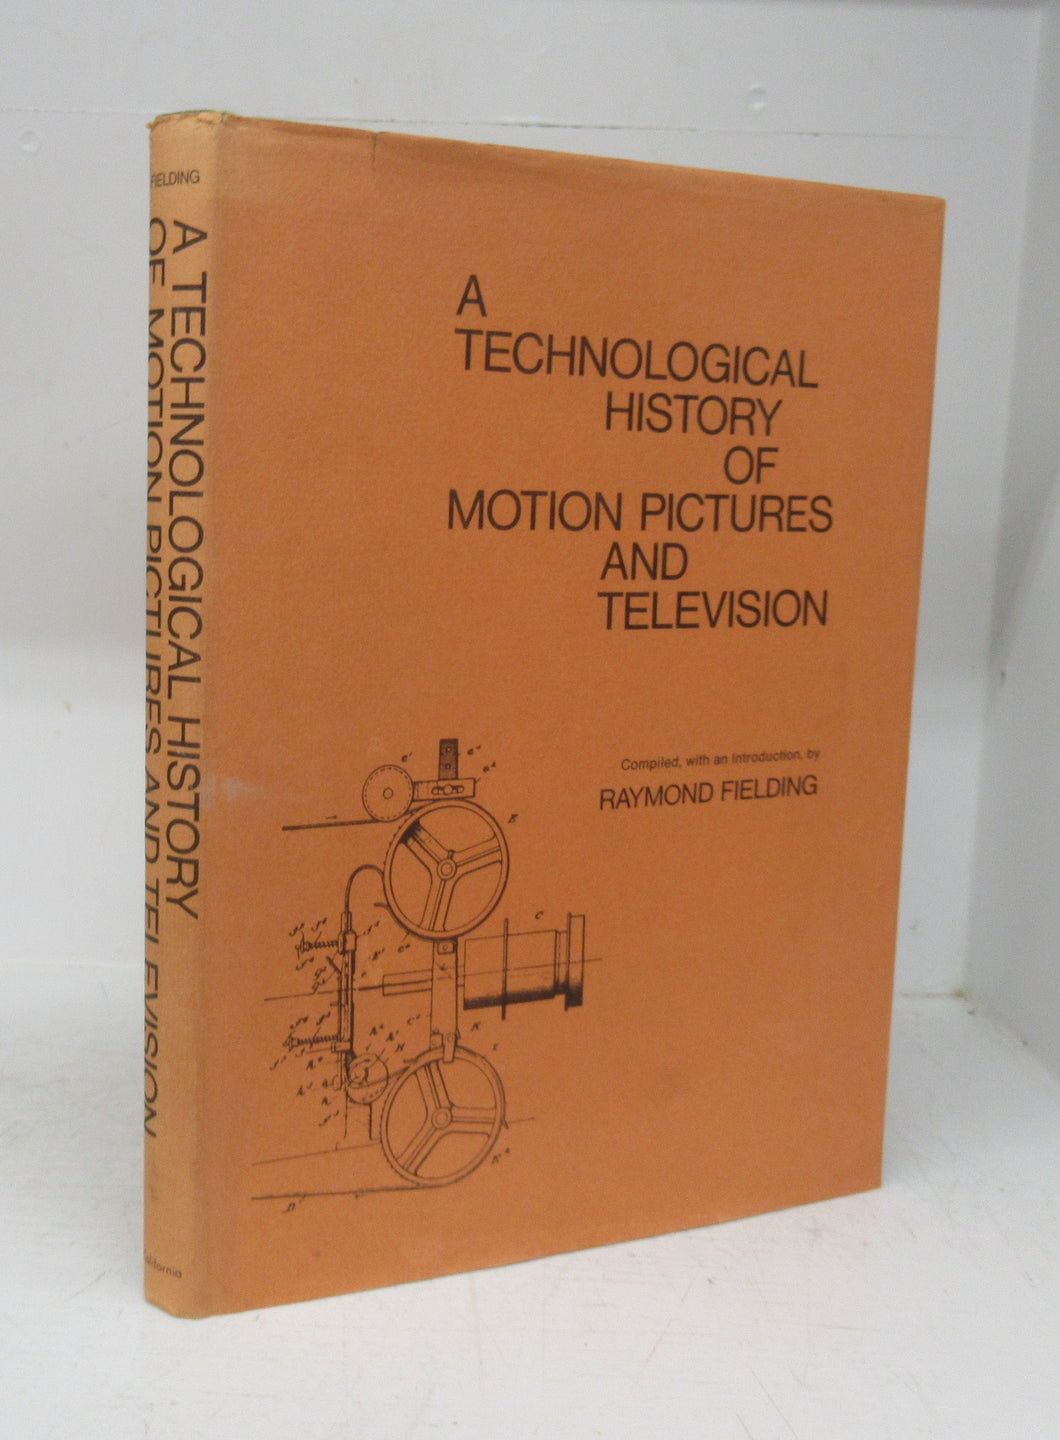 A Technological History of Motion Pictures and Television